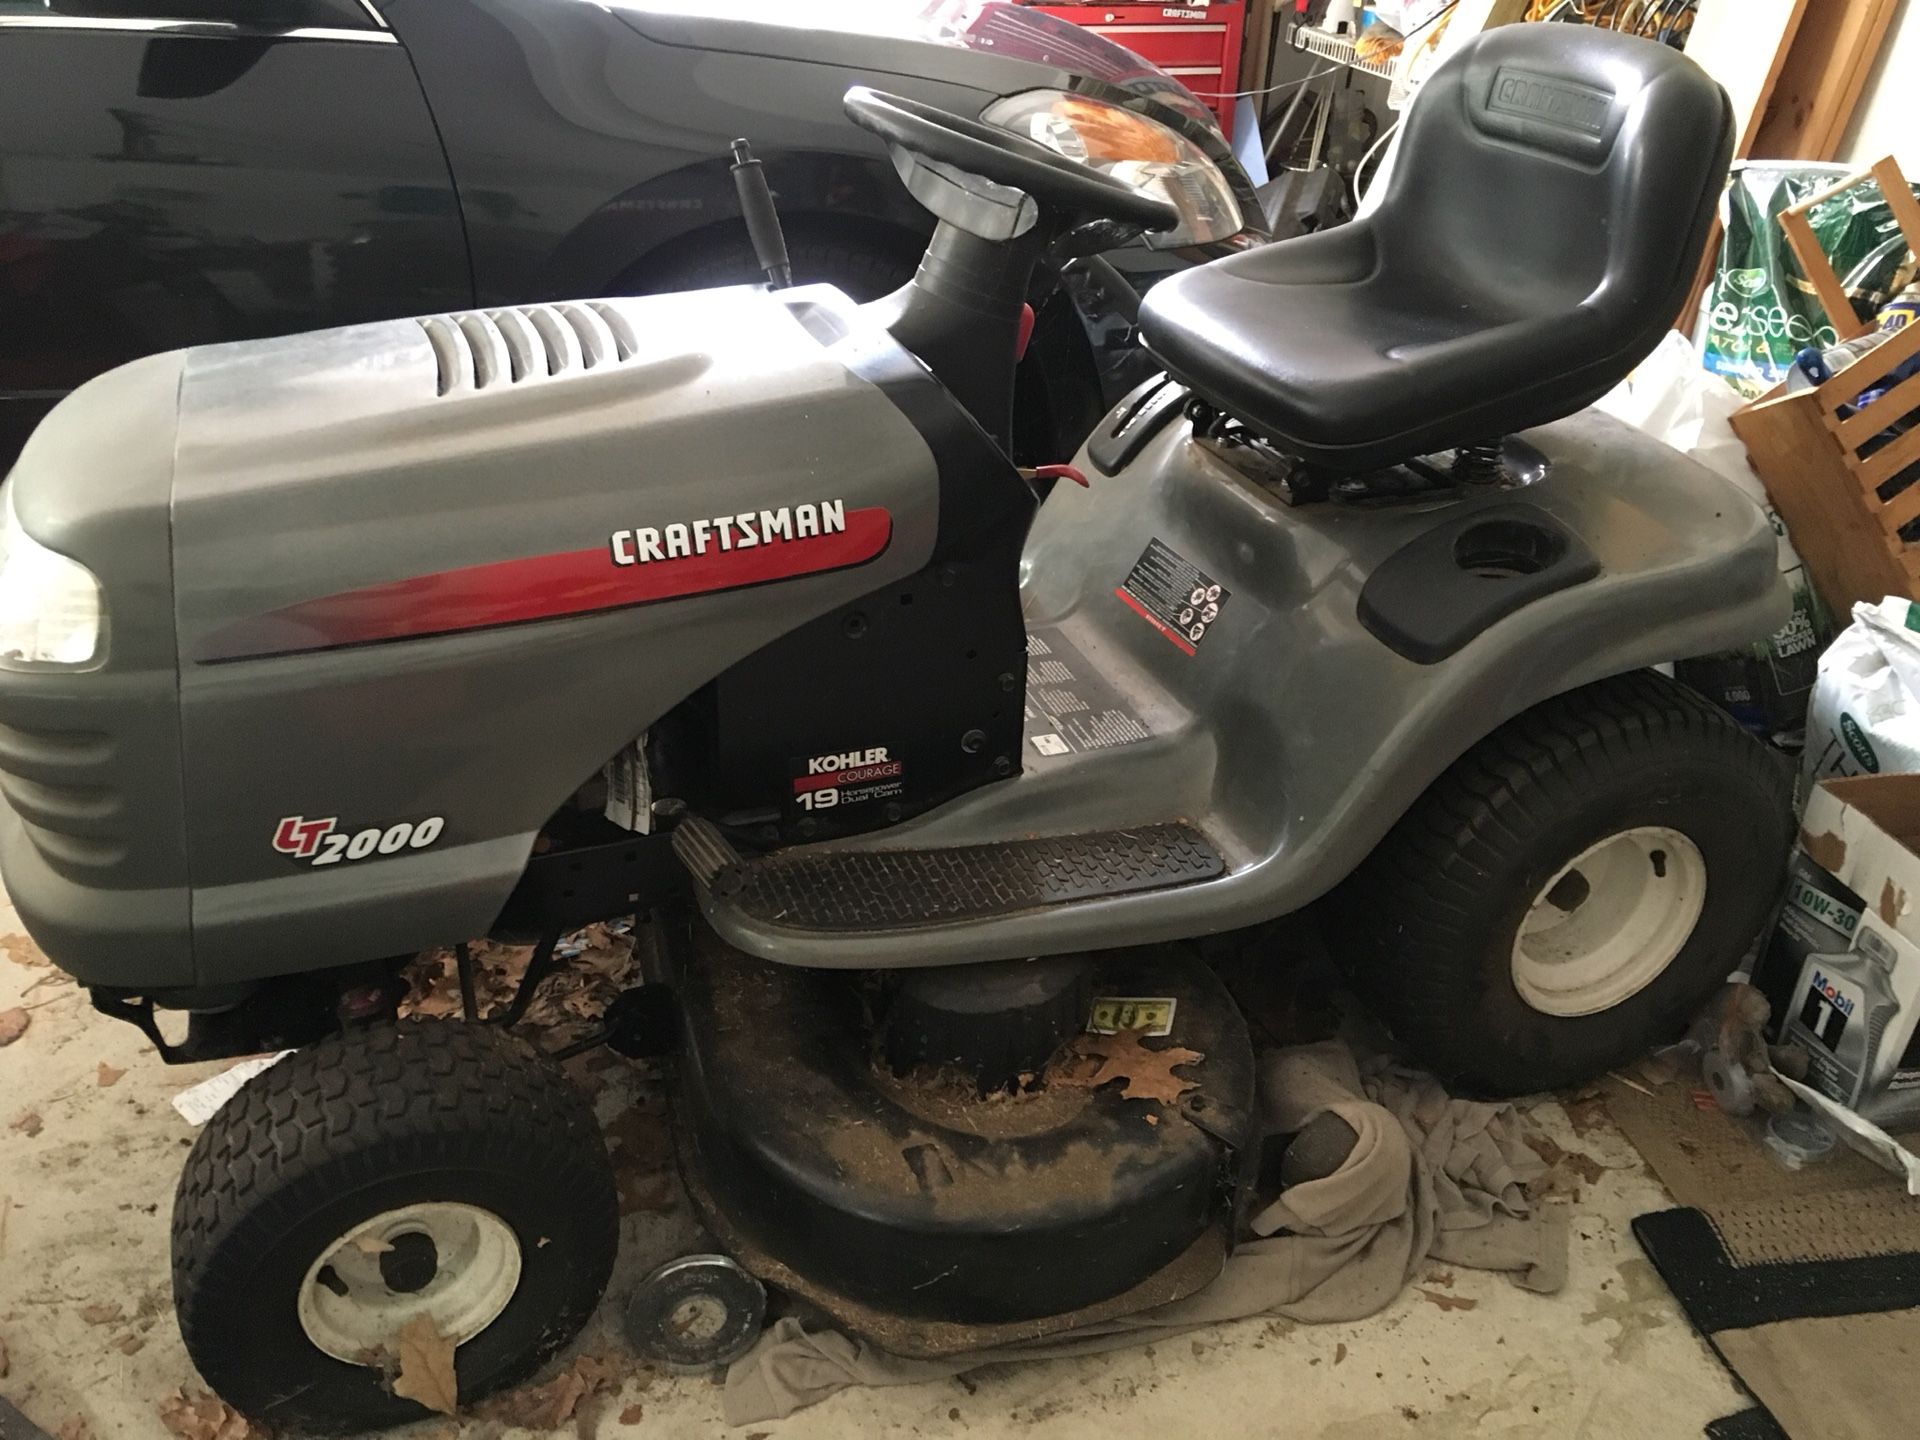 Craftsman lawn tractor. Has hydrostatic drive. It is 19 hp but engine is seized up. Transmission is good and so is mower. Put in a used engine for $1